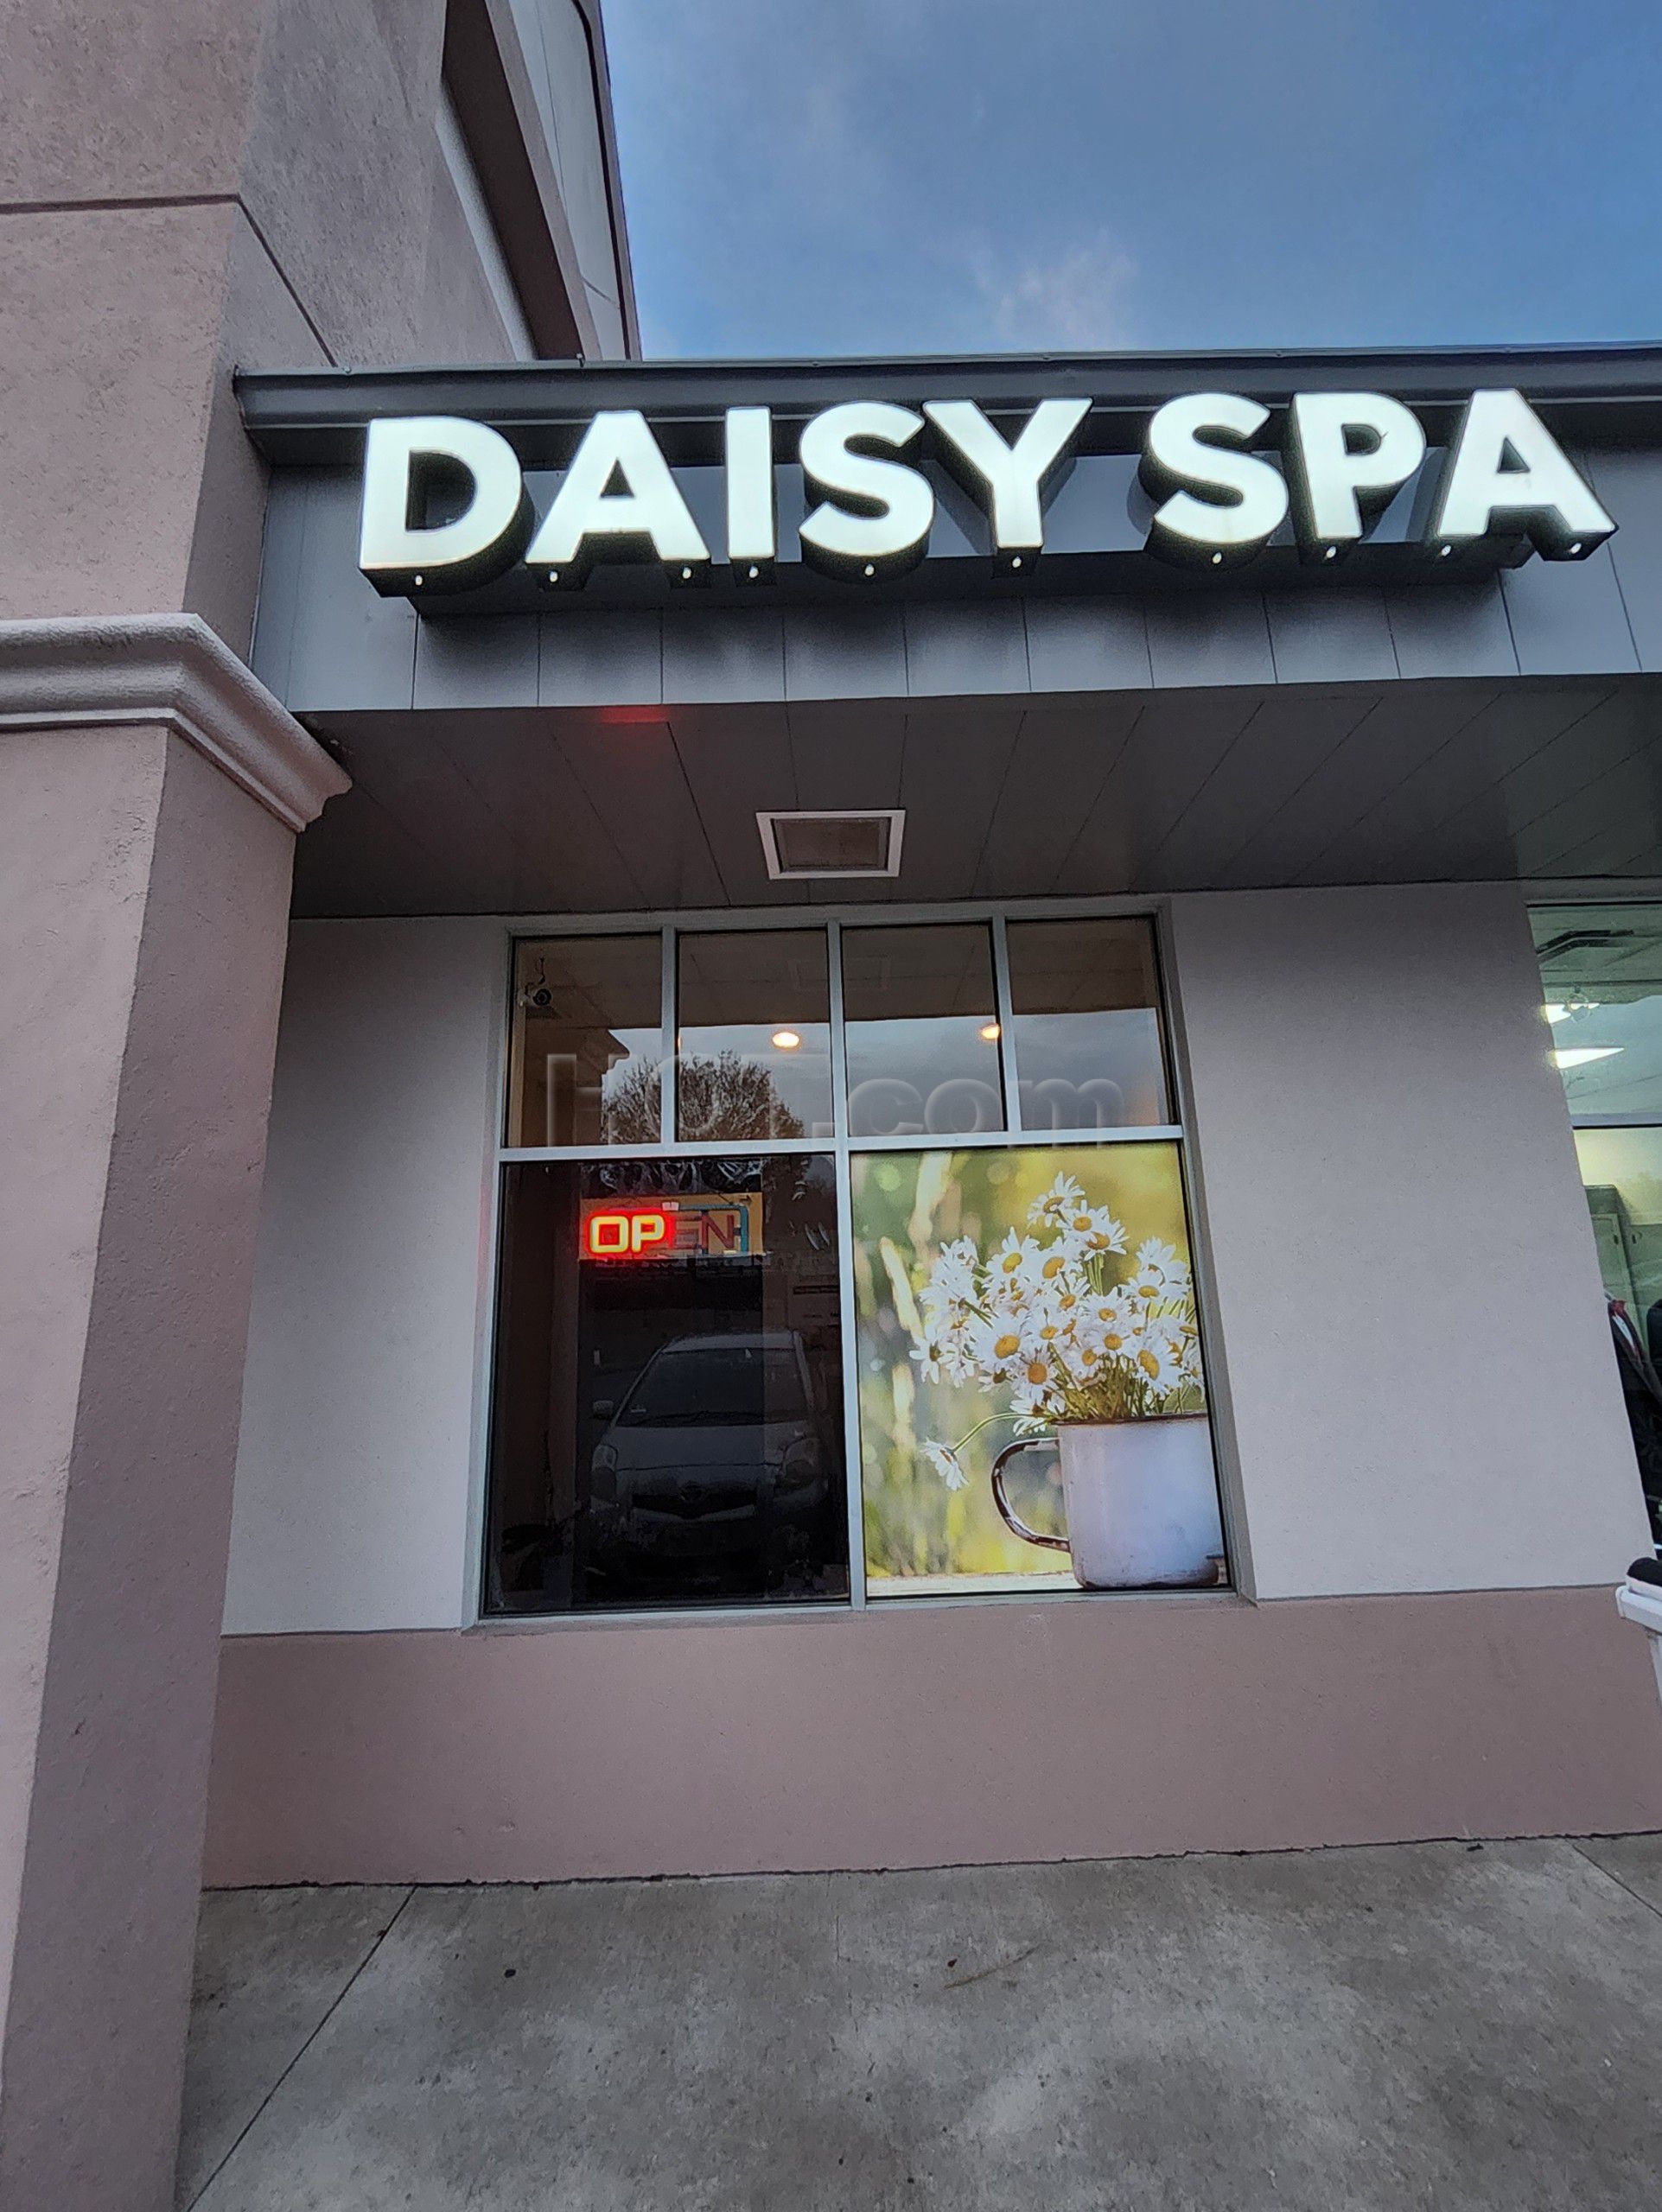 Butler, New Jersey Daisy Day Spa L Best Foot and Body